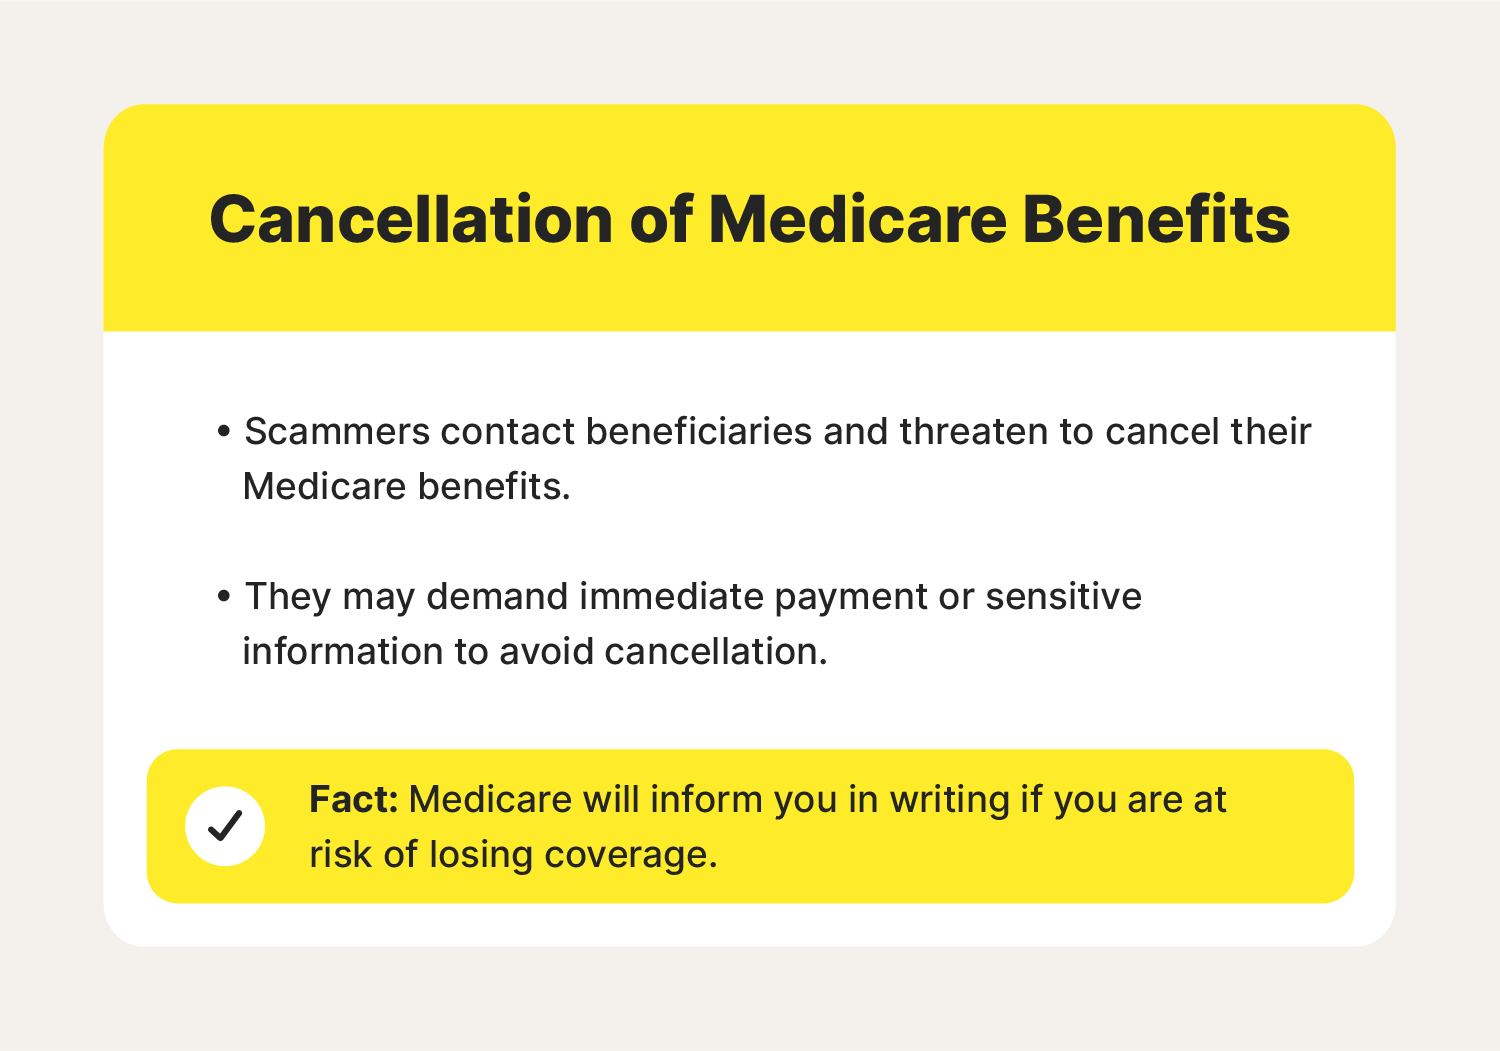 A chart covers one of the most common Medicare scams, threats to cancel someone’s Medicare benefits.